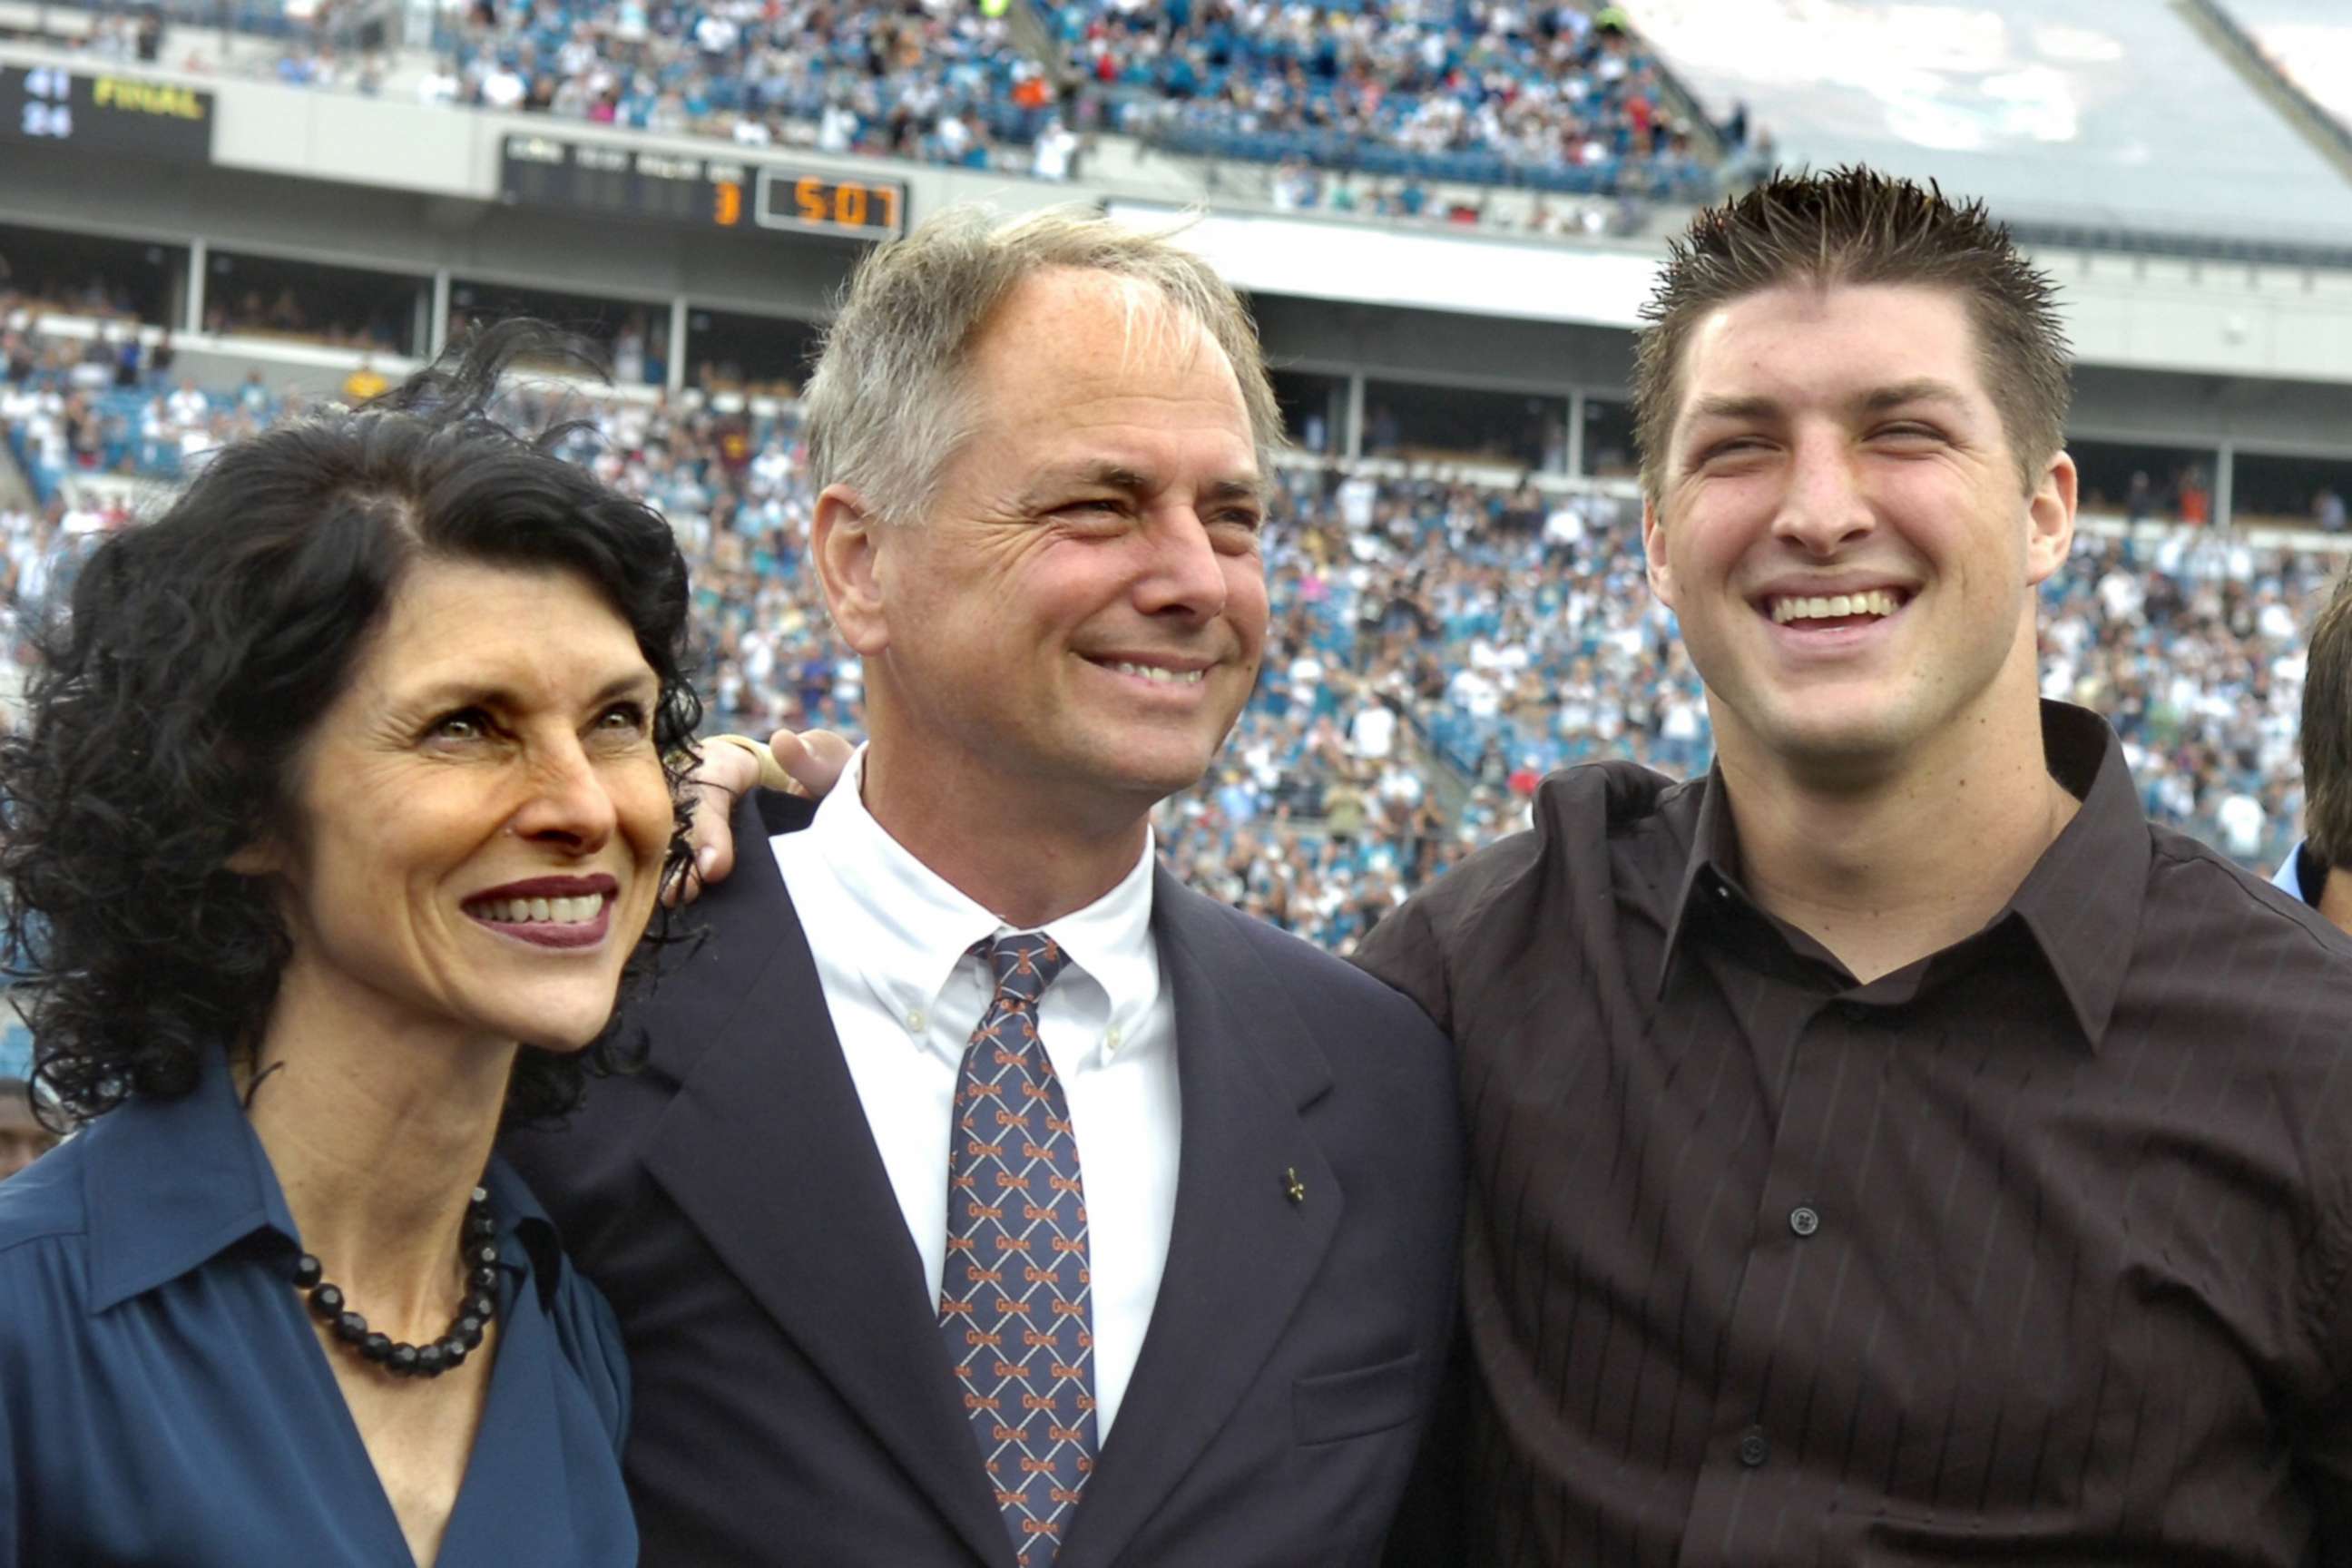 PHOTO: Heisman trophy winner Tim Tebow poses with his parents, Pam and Bob Tebow.